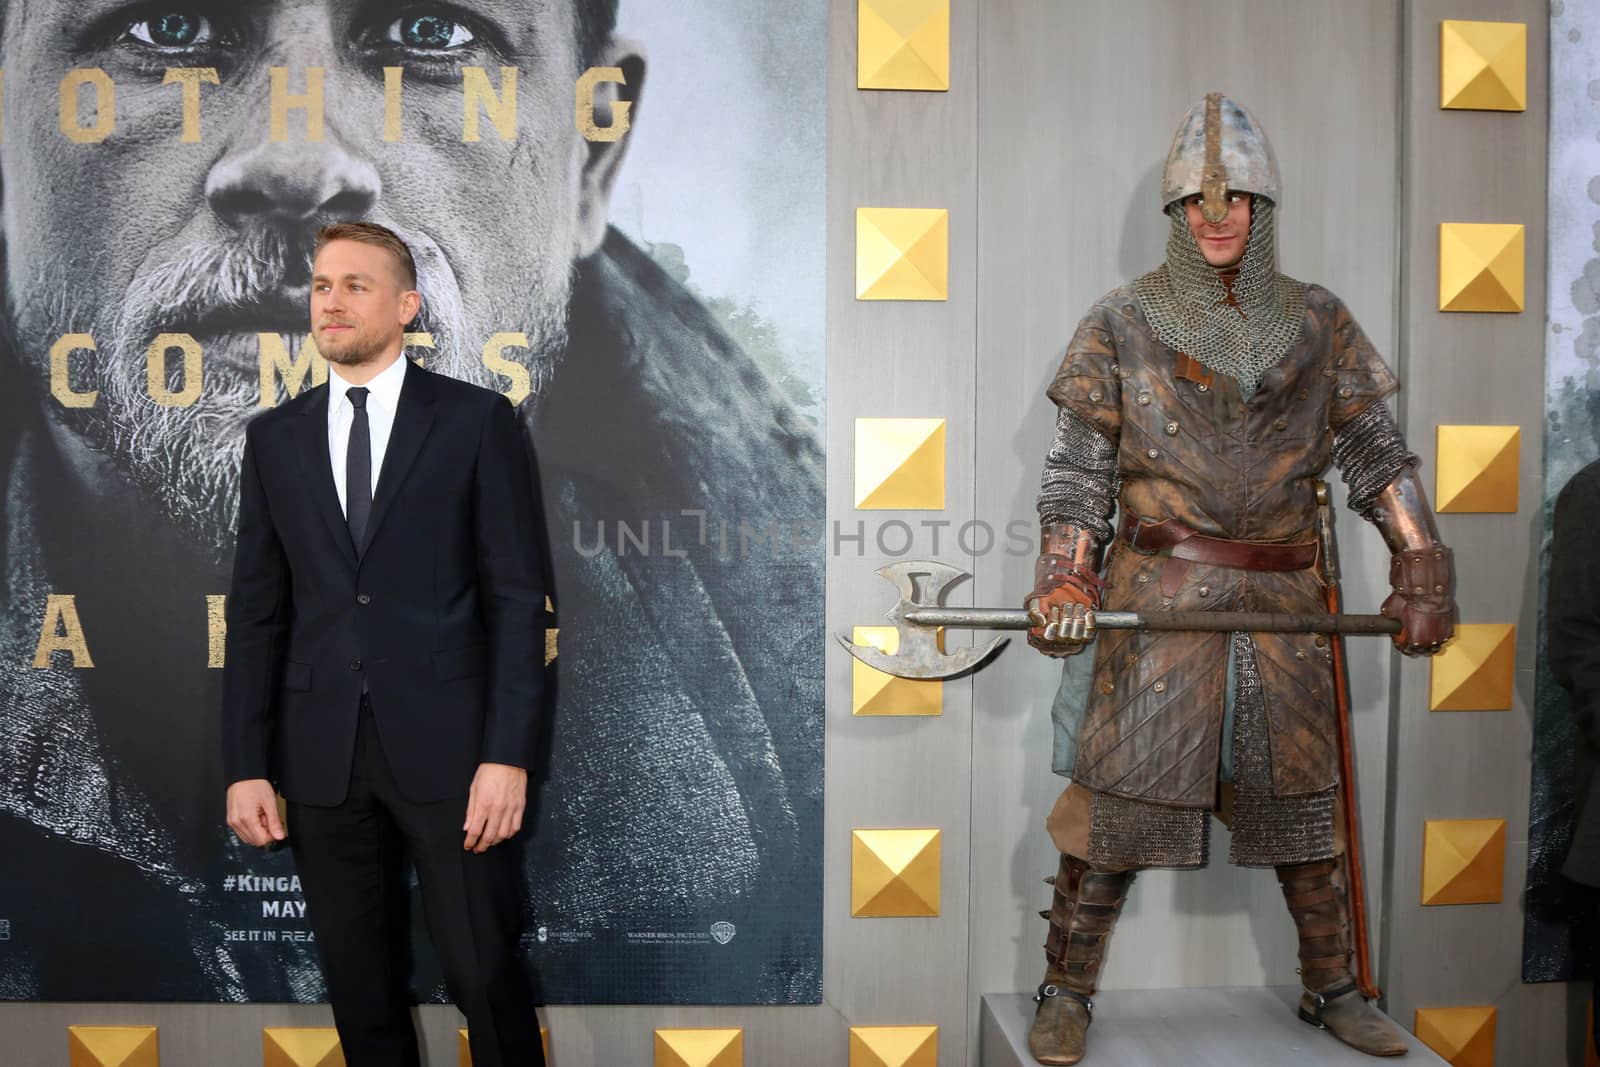 Charlie Hunnam
at the "King Arthur Legend of the Sword" World Premiere, TCL Chinese Theater IMAX, Hollywood, CA 05-08-17/ImageCollect by ImageCollect